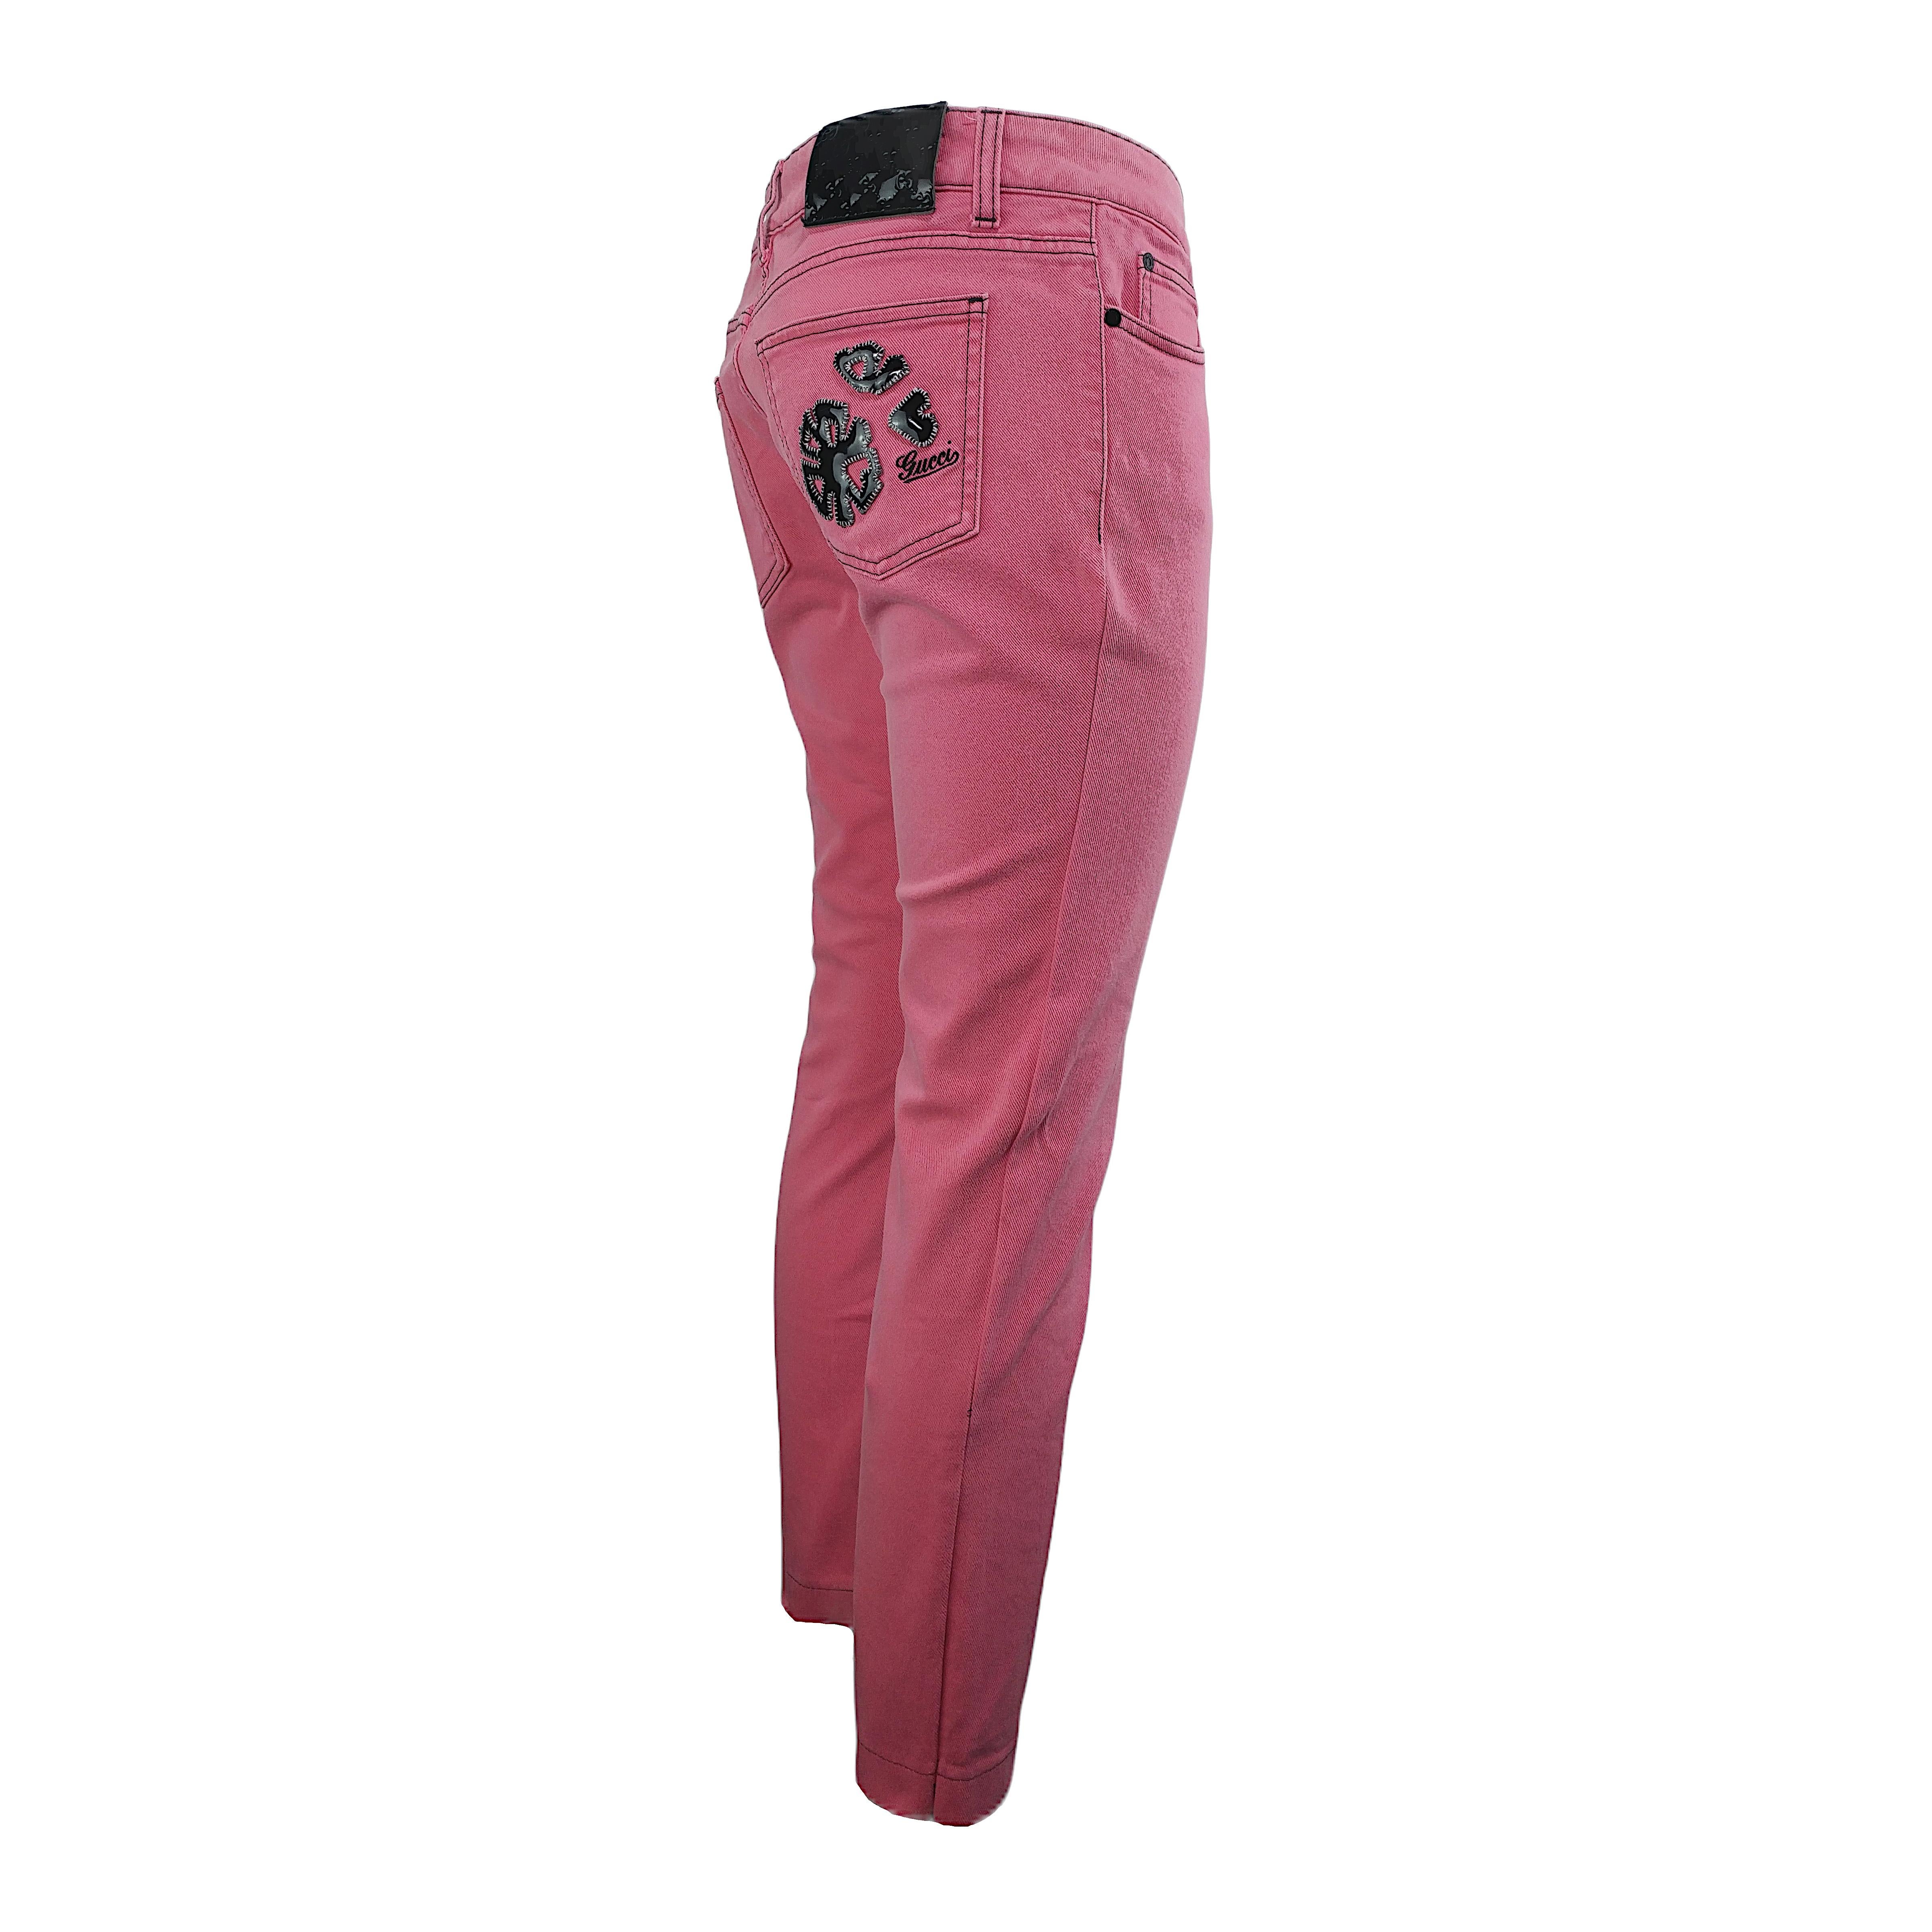 A gorgeous pair of vintage pink denim 5-pockets jeans in excellent conditions, dated 2007 and designed by Frida Giannini. They feature a low rise, black logoed metal buttons and a golden zip, patches on the back right pocket with flowers and the